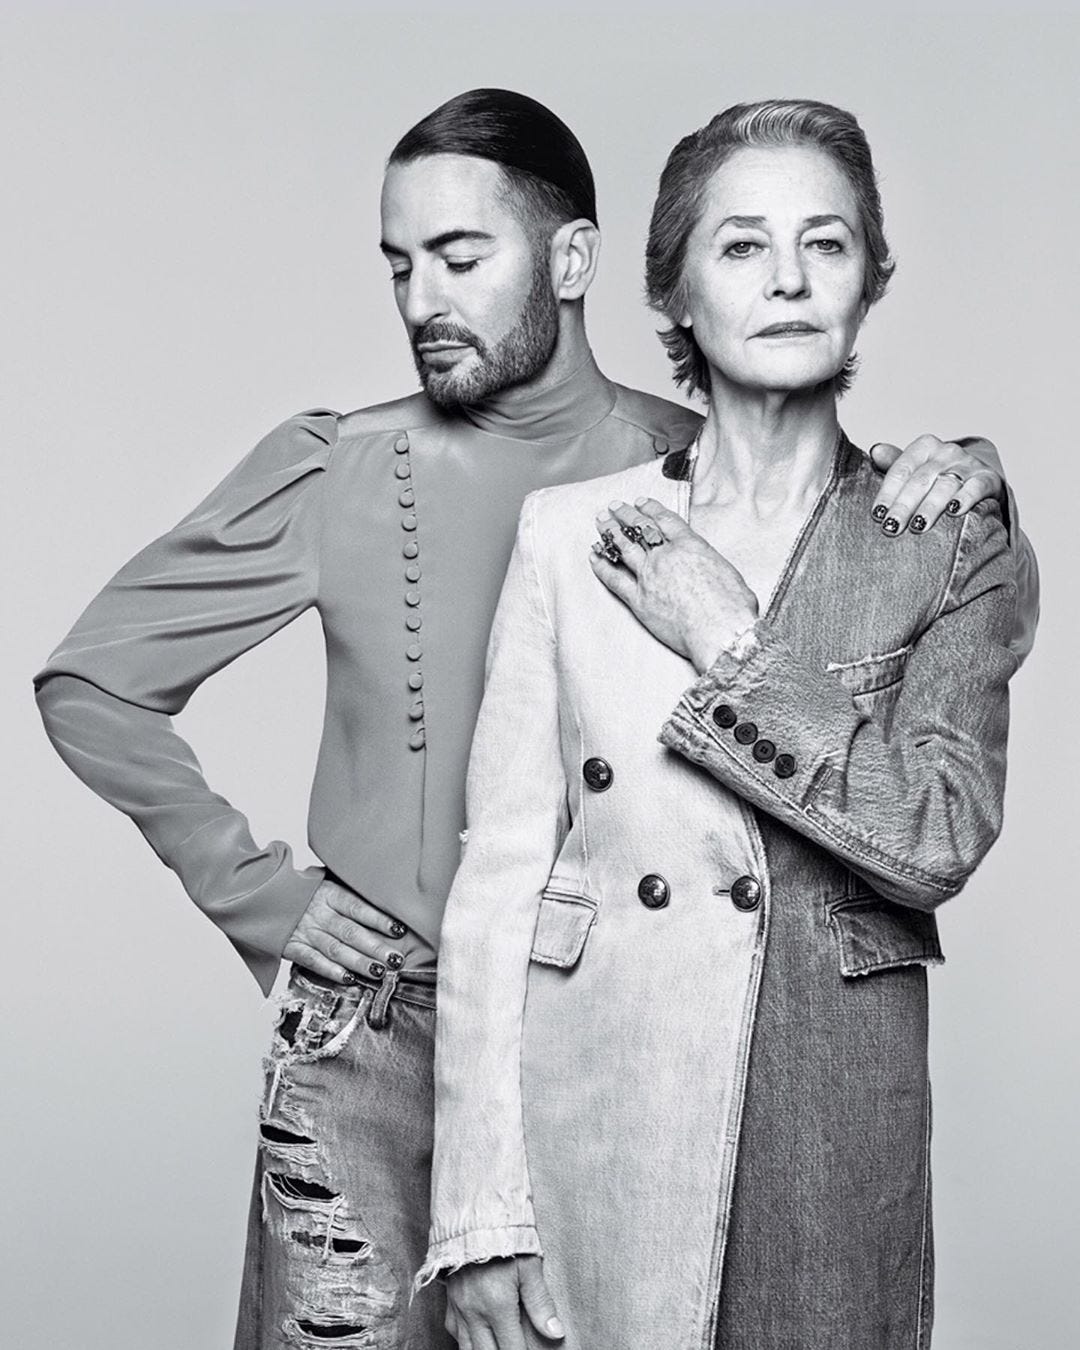 Givenchy's SS20 Campaign Marc Jacobs and Charlotte Rampling is a Contemporary Here's why. | by Thaddeus Han | Medium